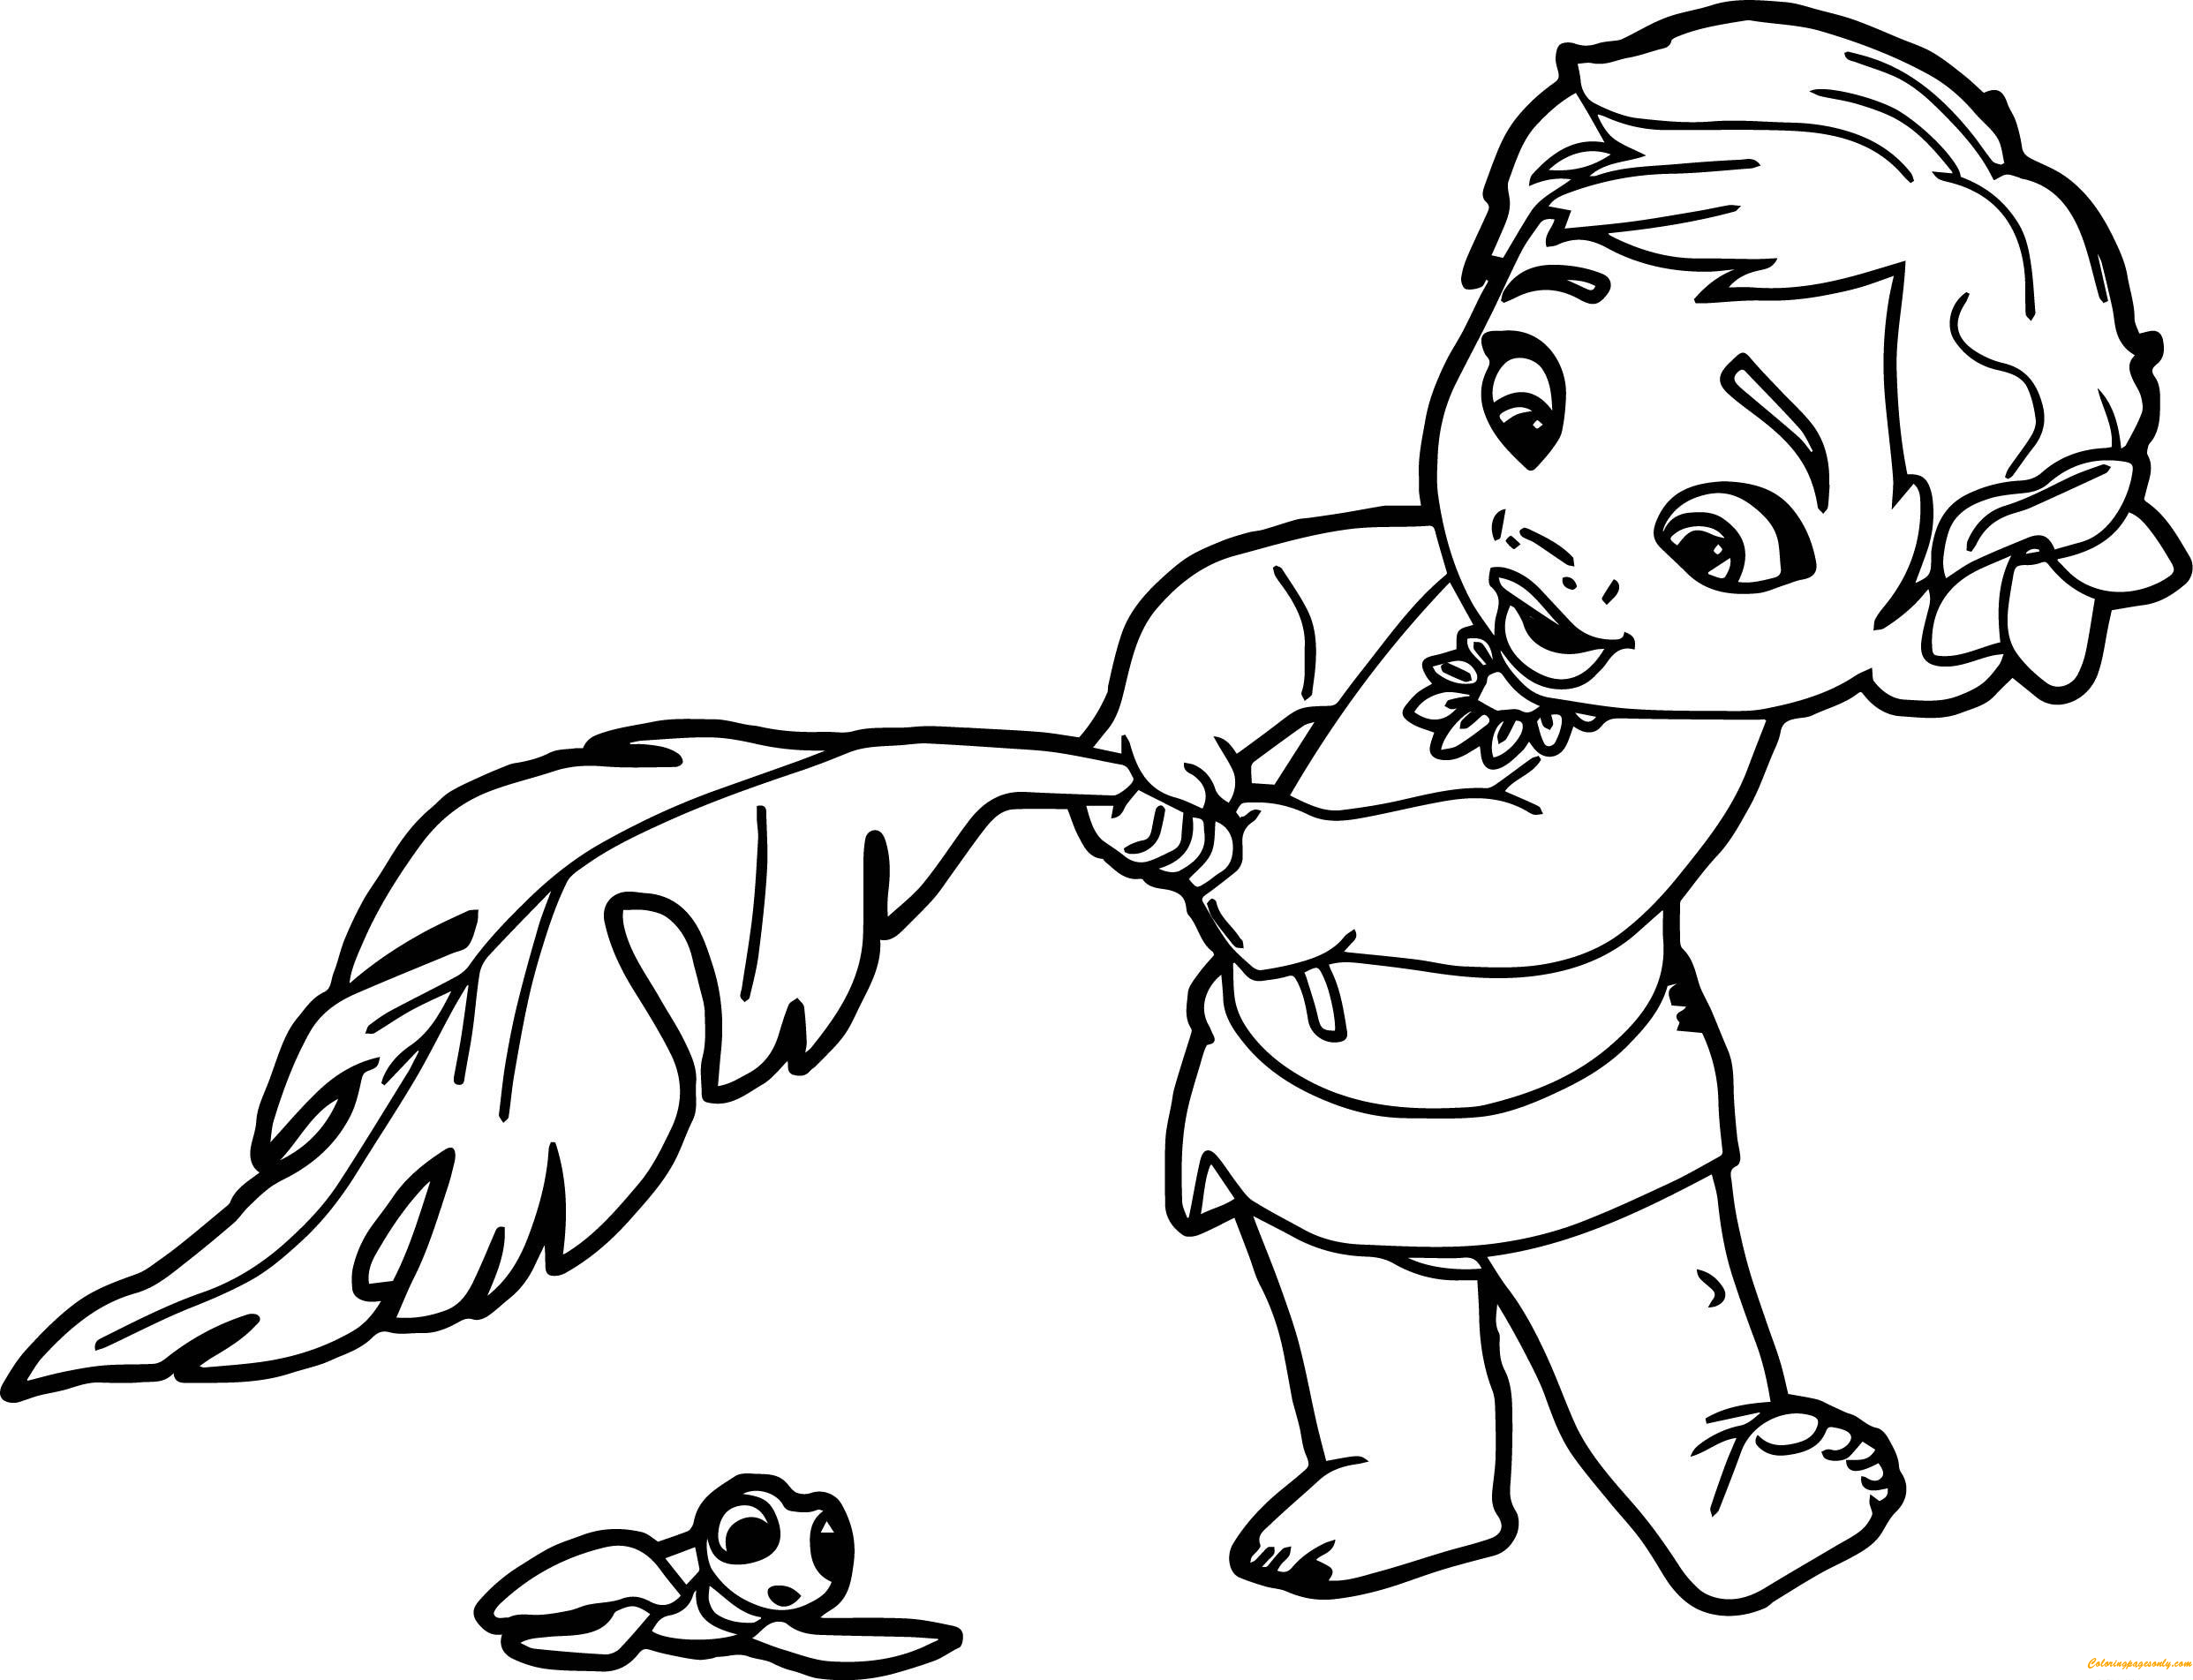 Baby Moana Coloring Page - Free Coloring Pages Online